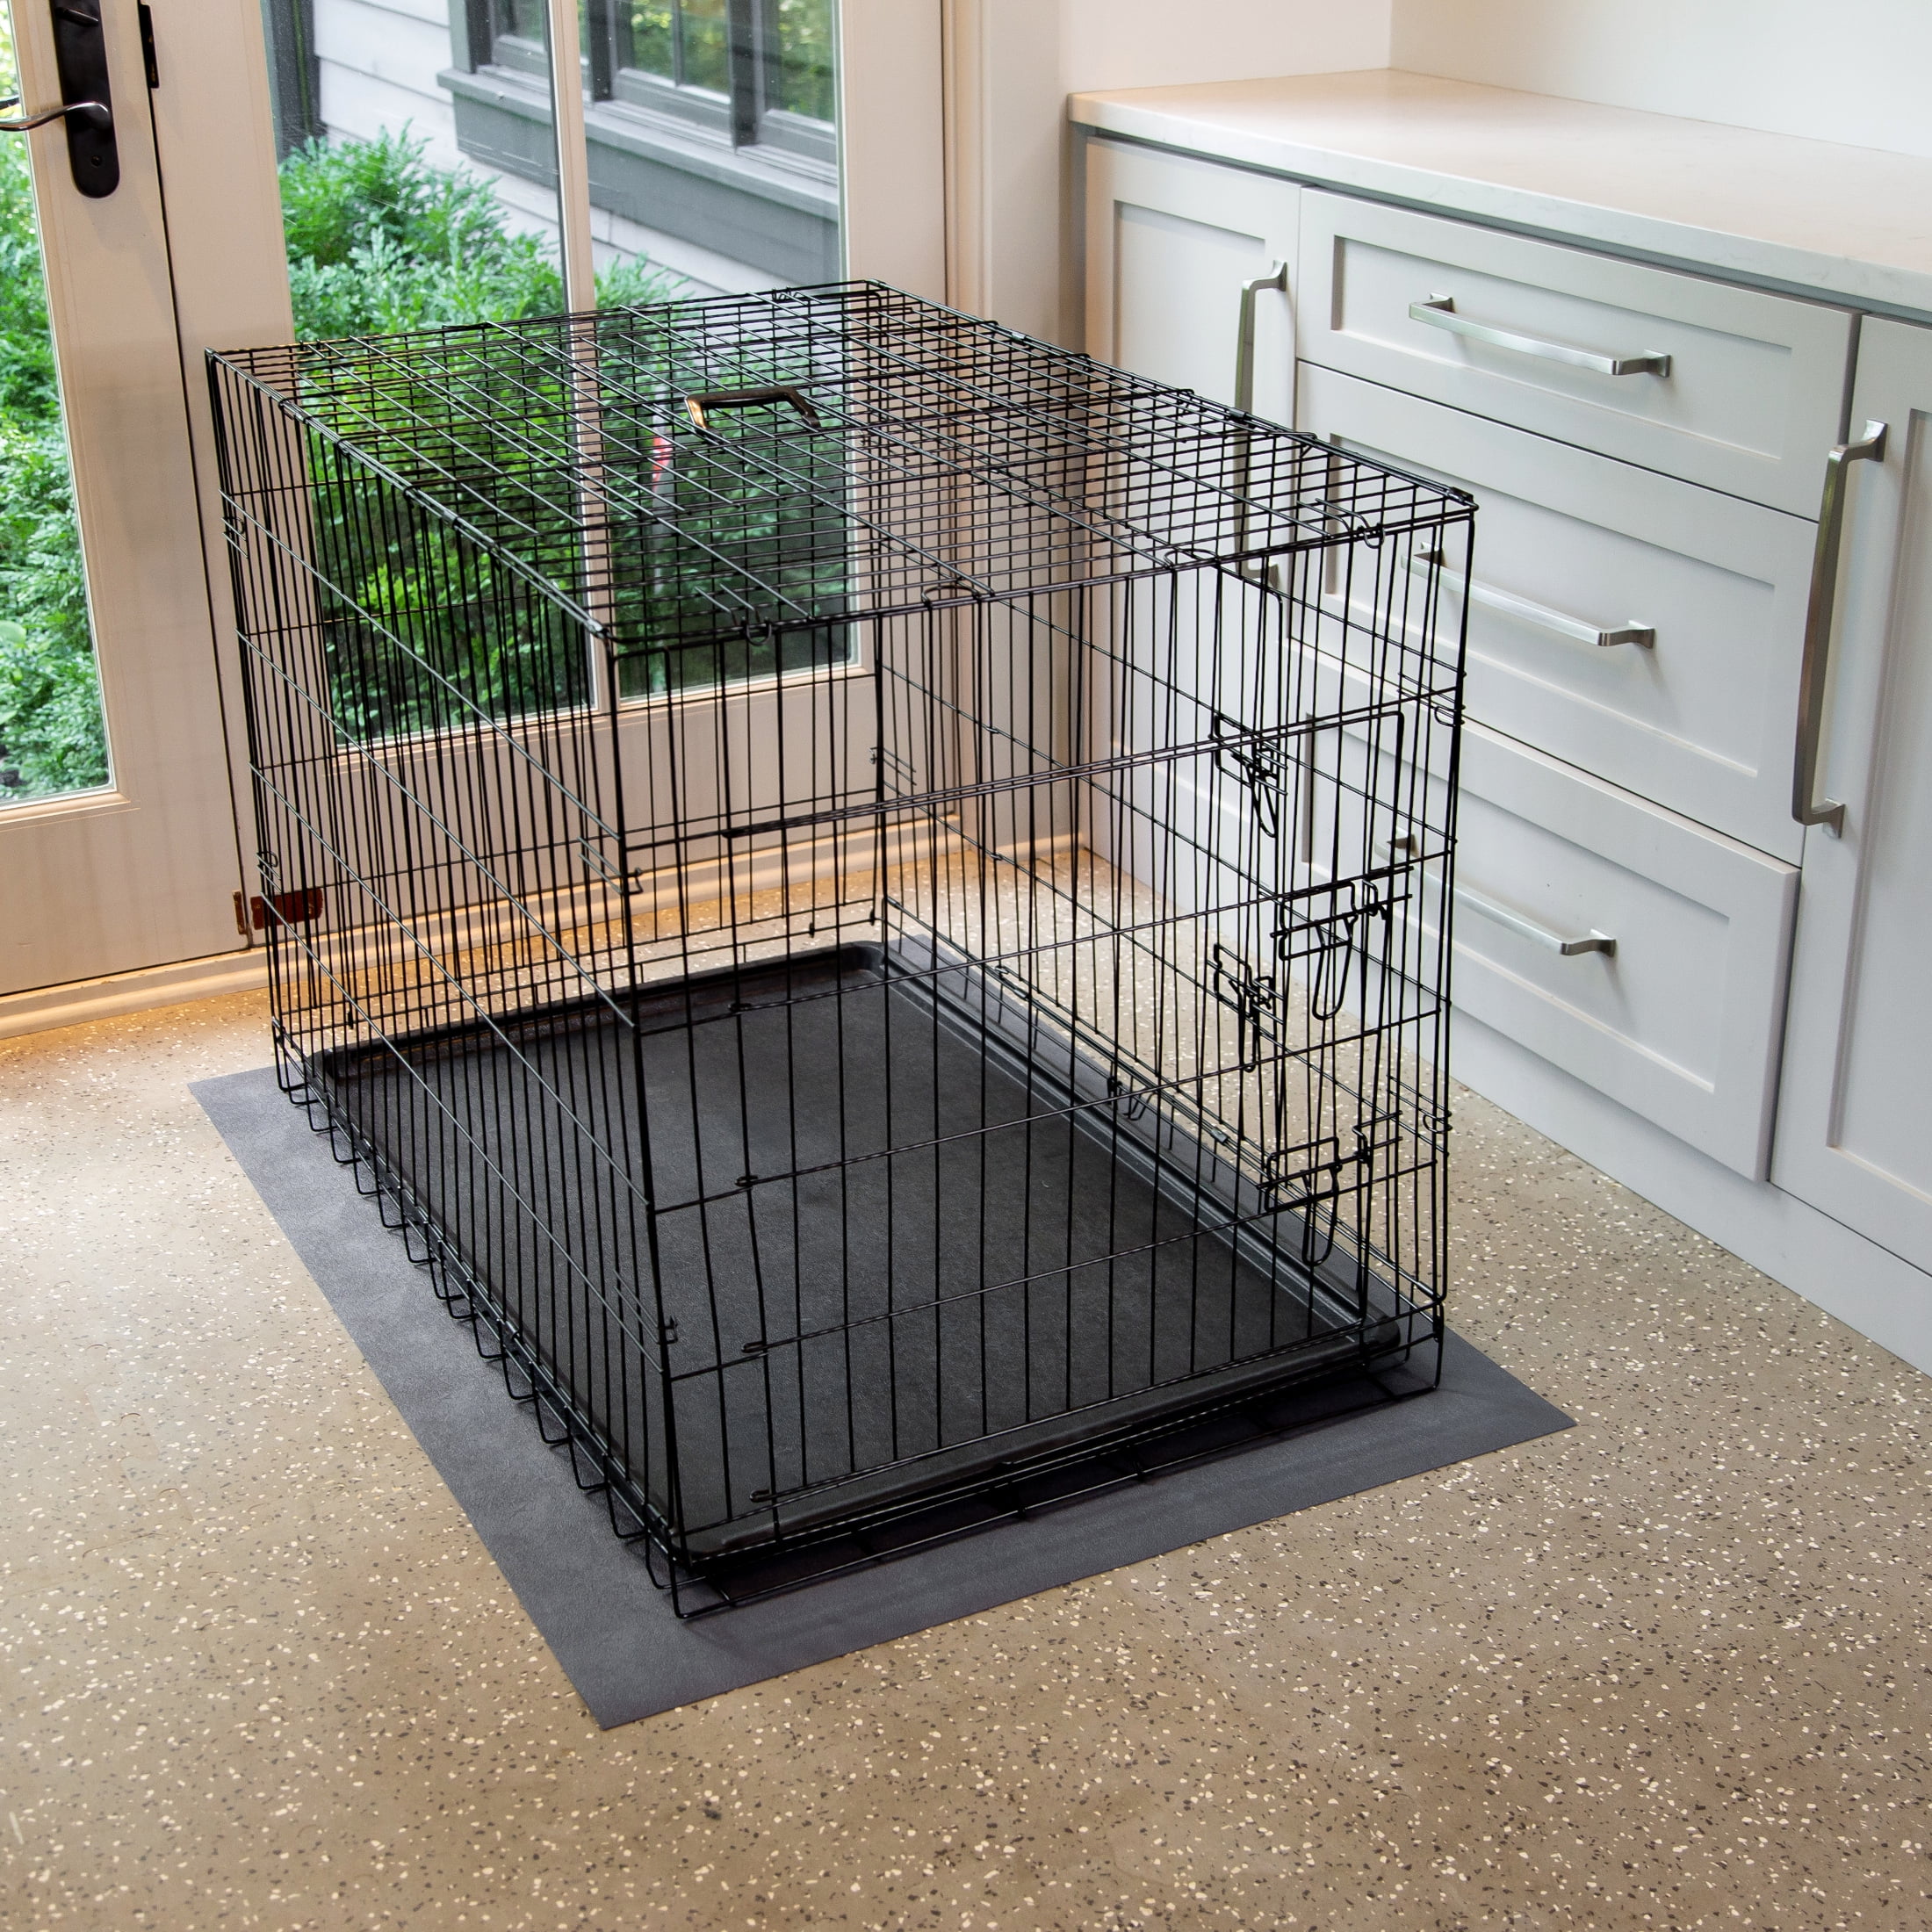 RESILIA Under Pet Cage Mat for Bird Cages, Reptile Aquariums, Dog Kennels,  Water-Resistant Pad for Hard Floors and Surfaces, 30 Inches x 48 Inches